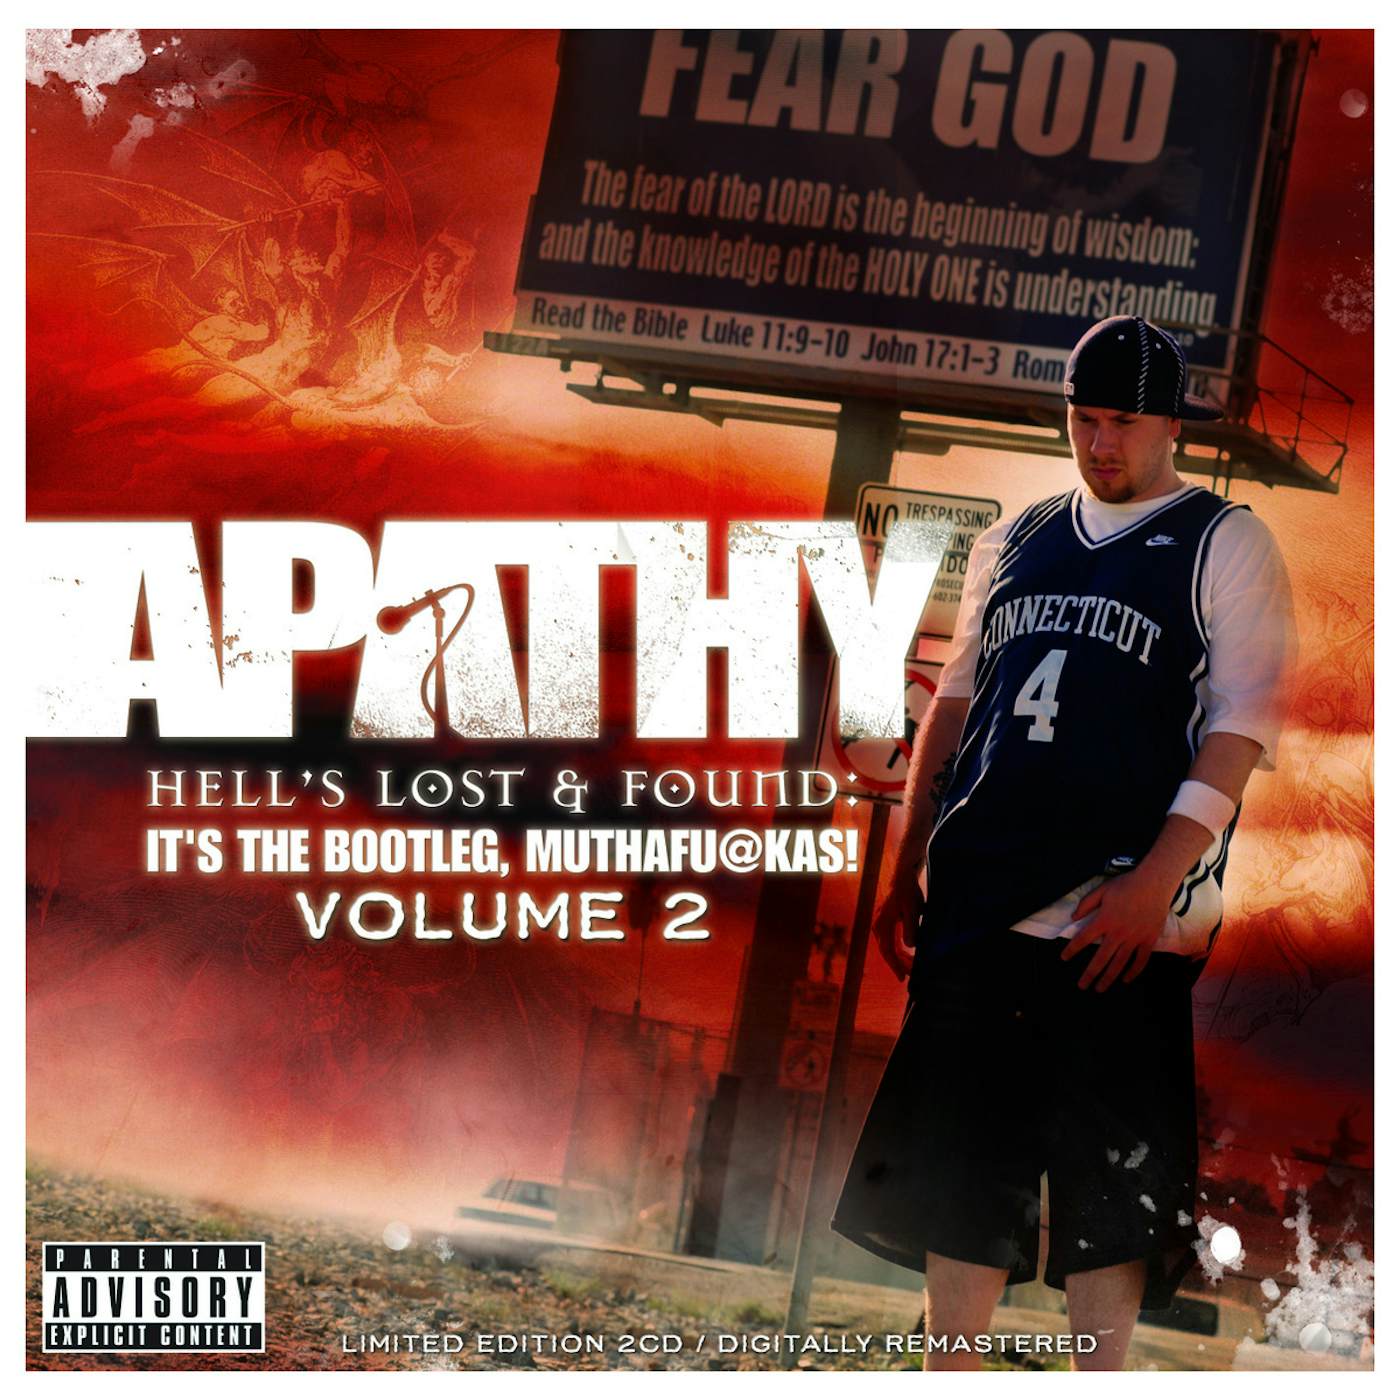 Apathy HELL'S LOST & FOUND: IT'S THE BOOTLEG MUTHAFUCKAS CD